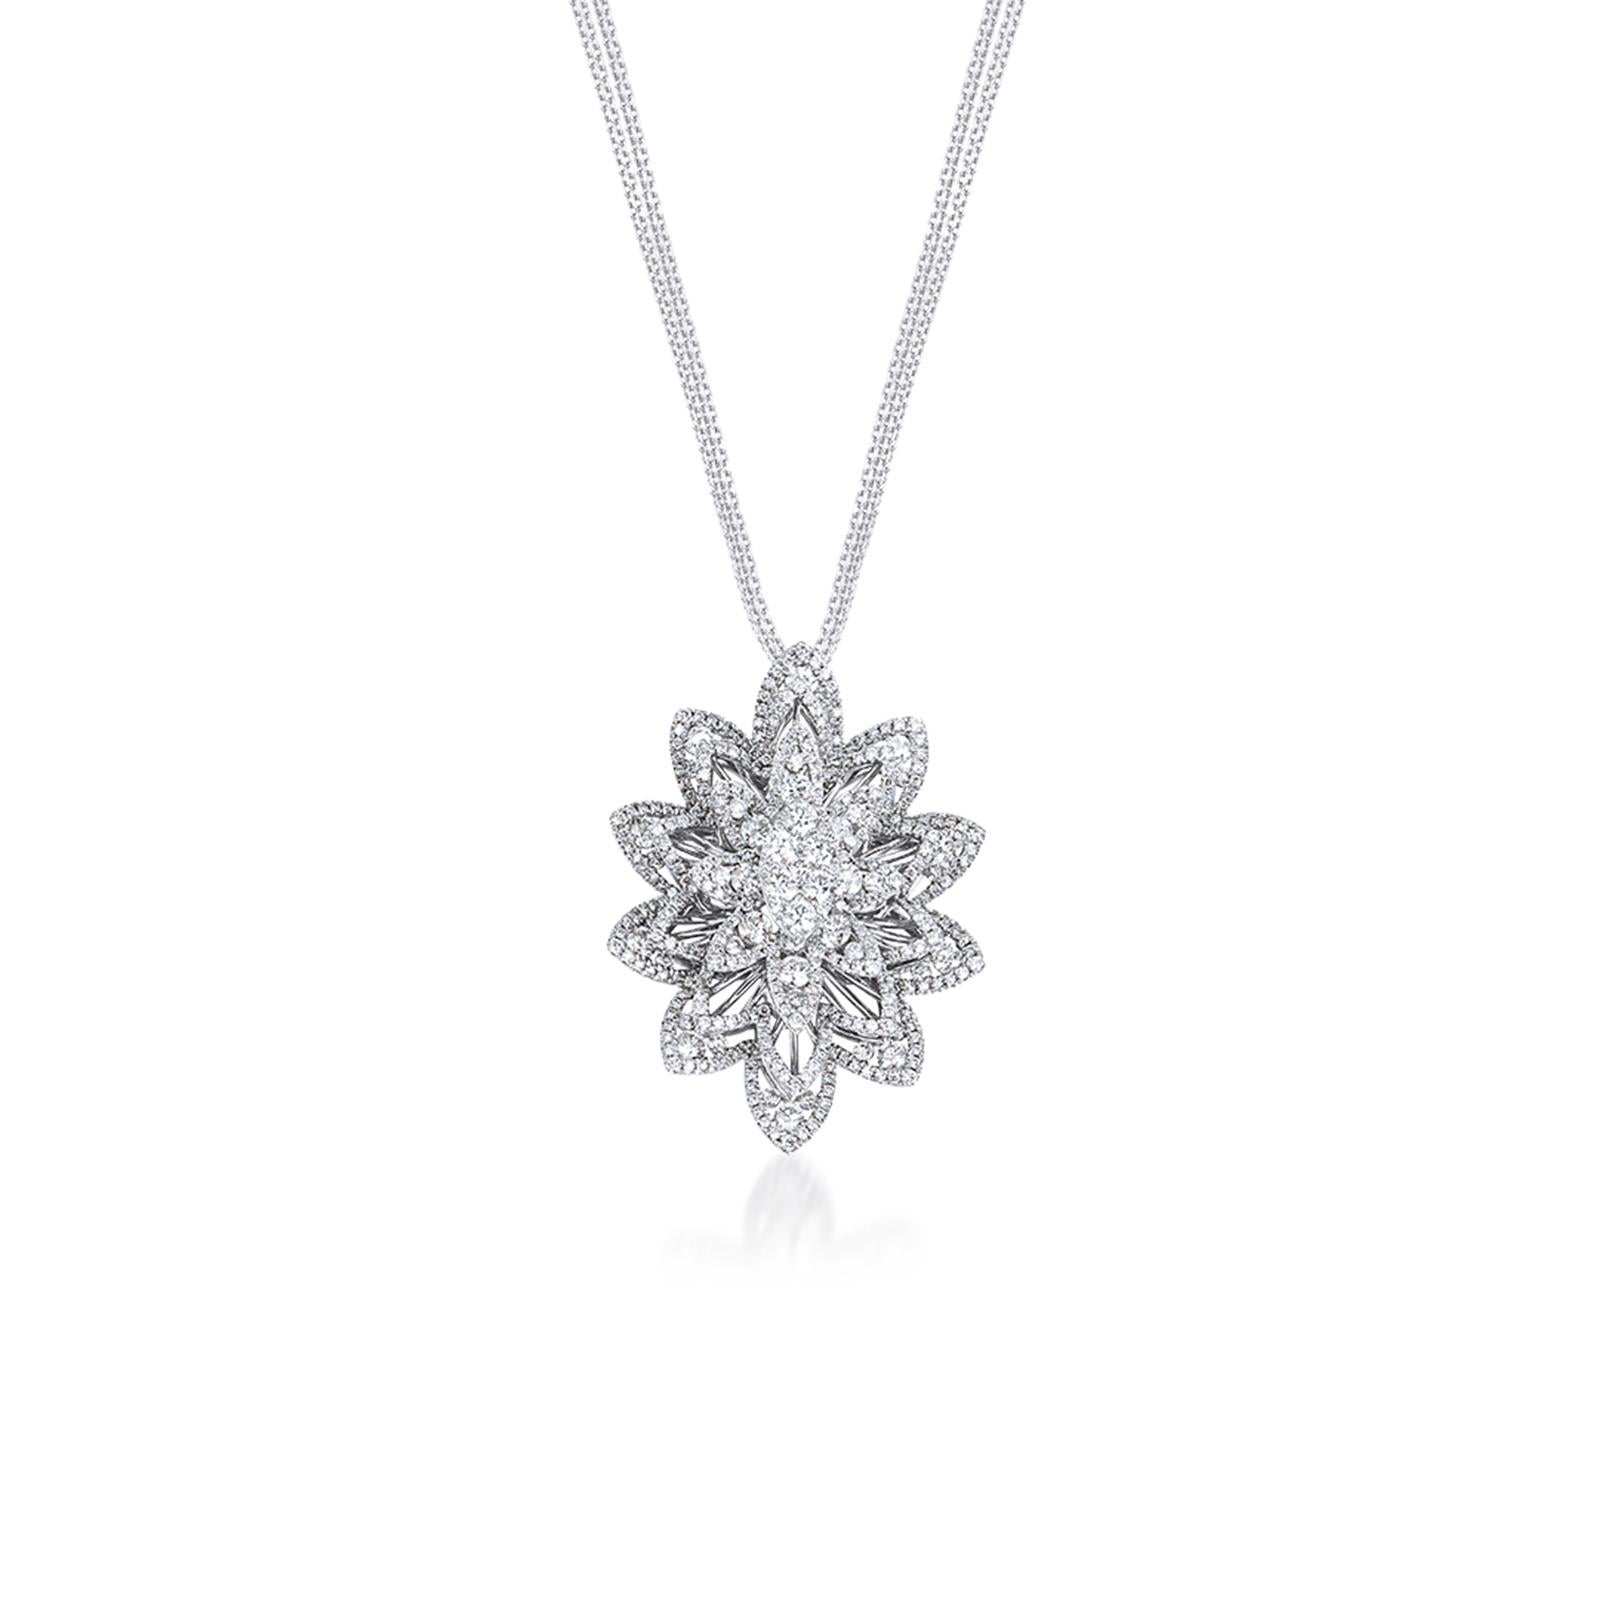 Artisan Water Flower Diamond Pendant Necklace, 3.13 Carat Weight 18K White Gold For Sale